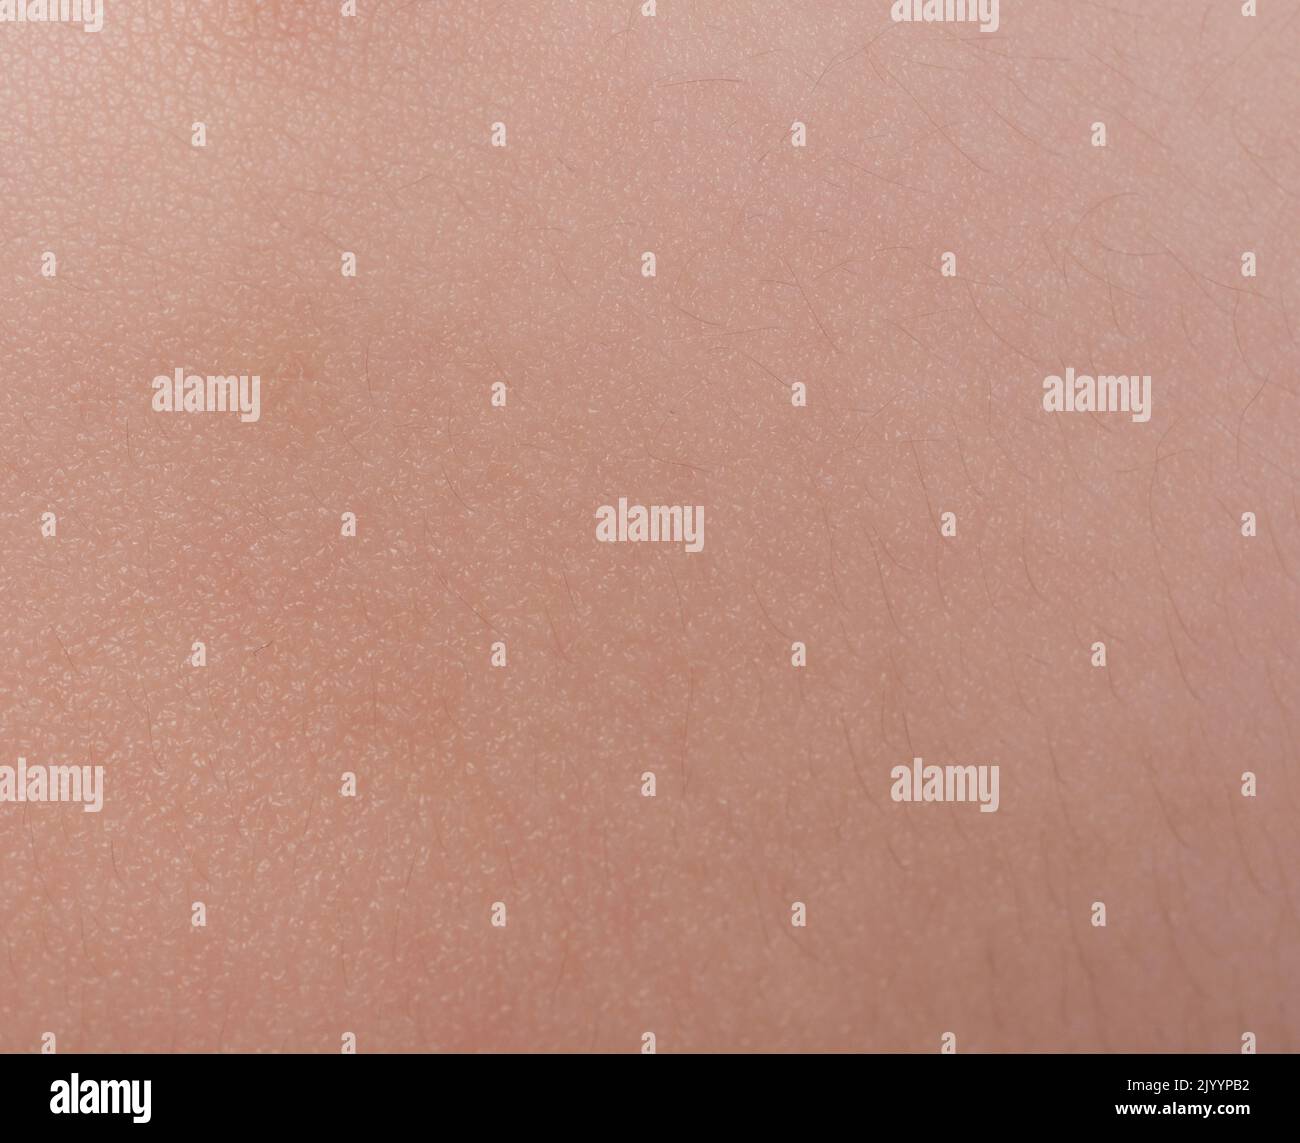 Surface of baby skin macro close up view textur Stock Photo